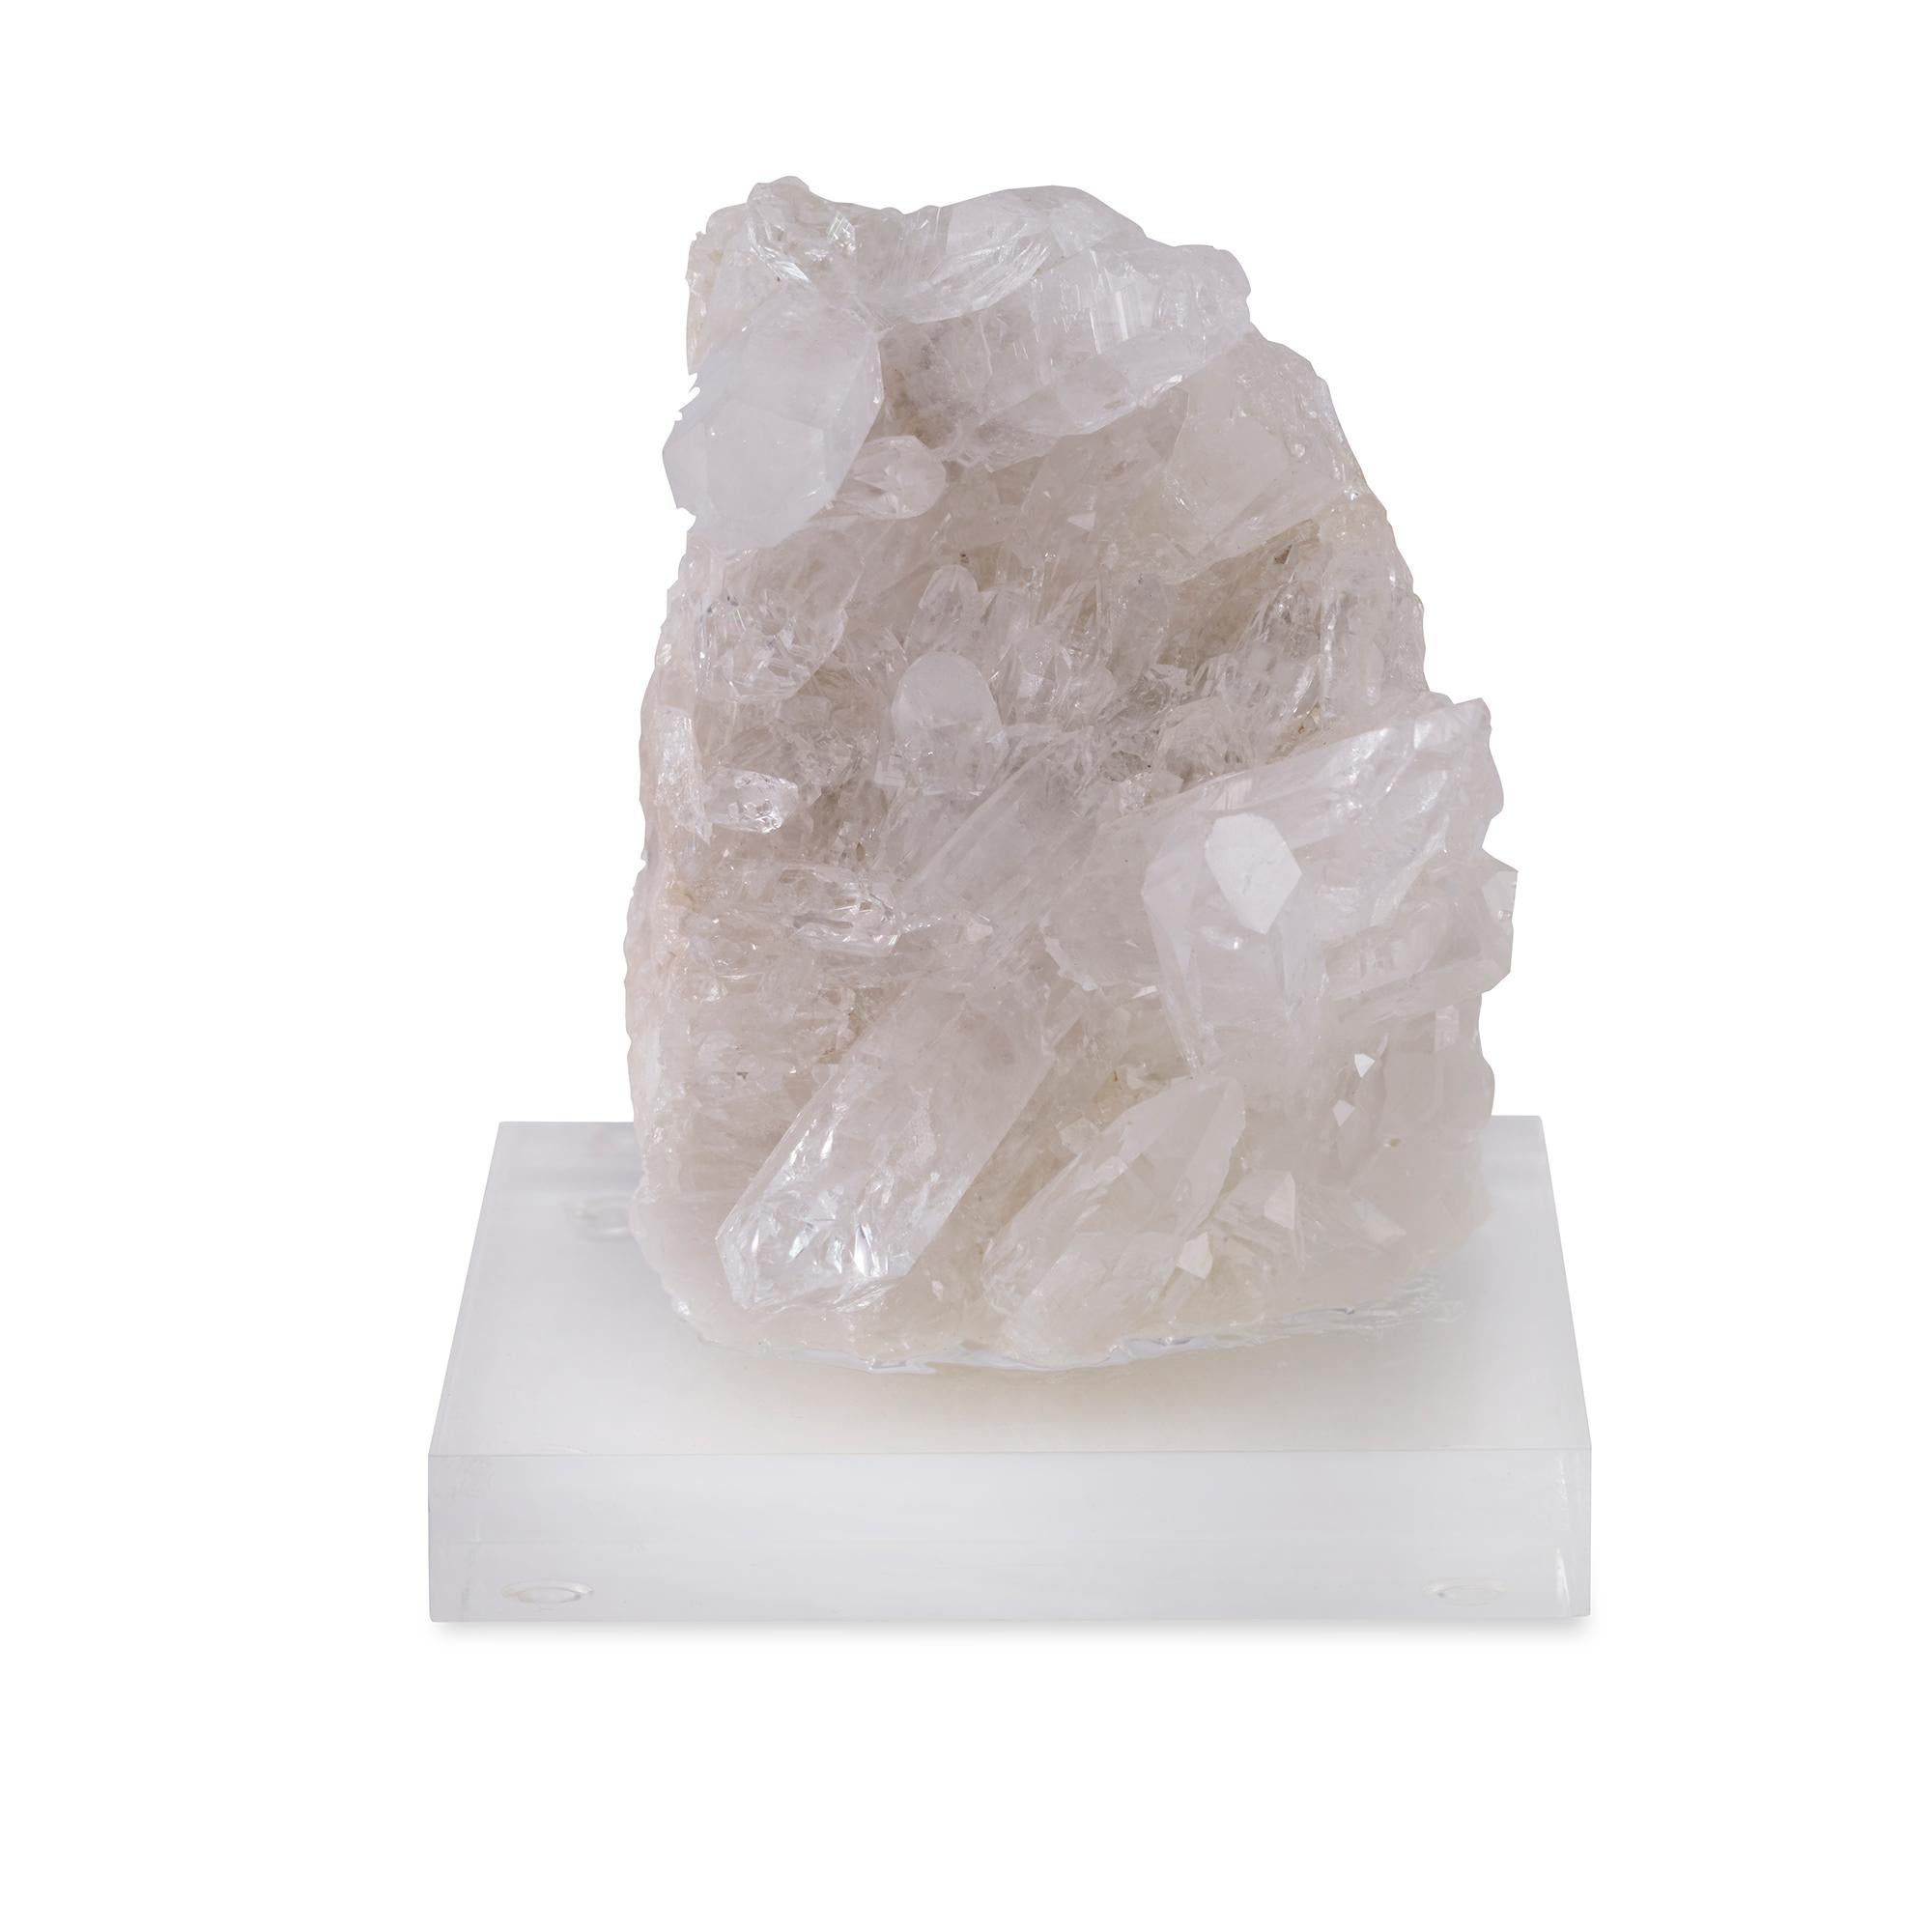 A white crystal cluster mounted on a clear acrylic base. Due to the natural material, variation in size, shape, and color is to be expected.
  